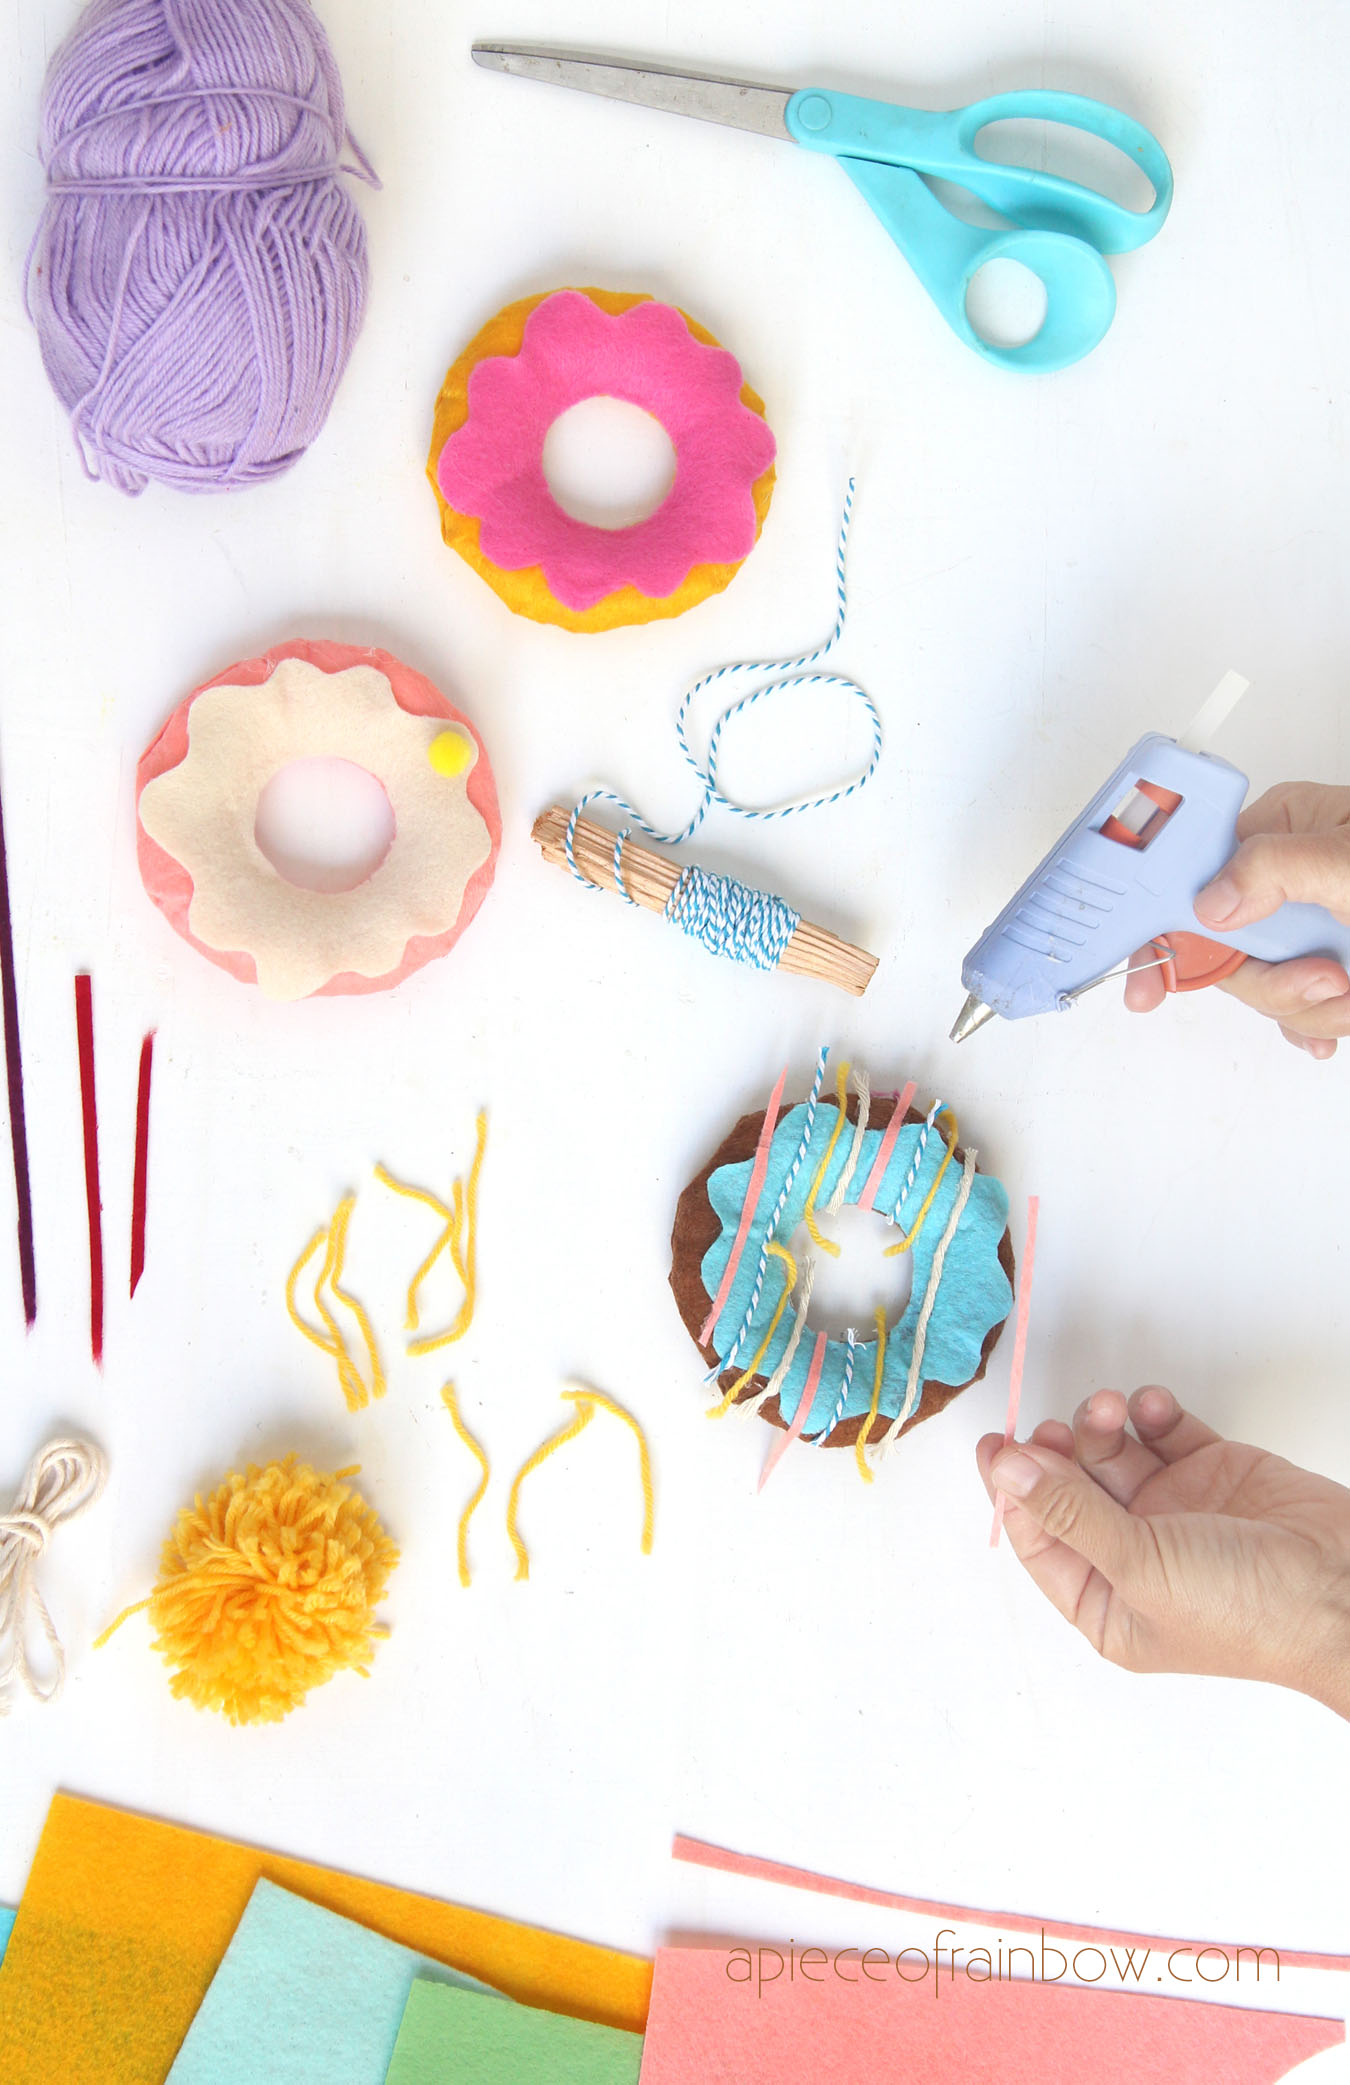 use colorful twine, yarn, pompoms, felt scraps to make sprinkles and toppings on the felt donuts